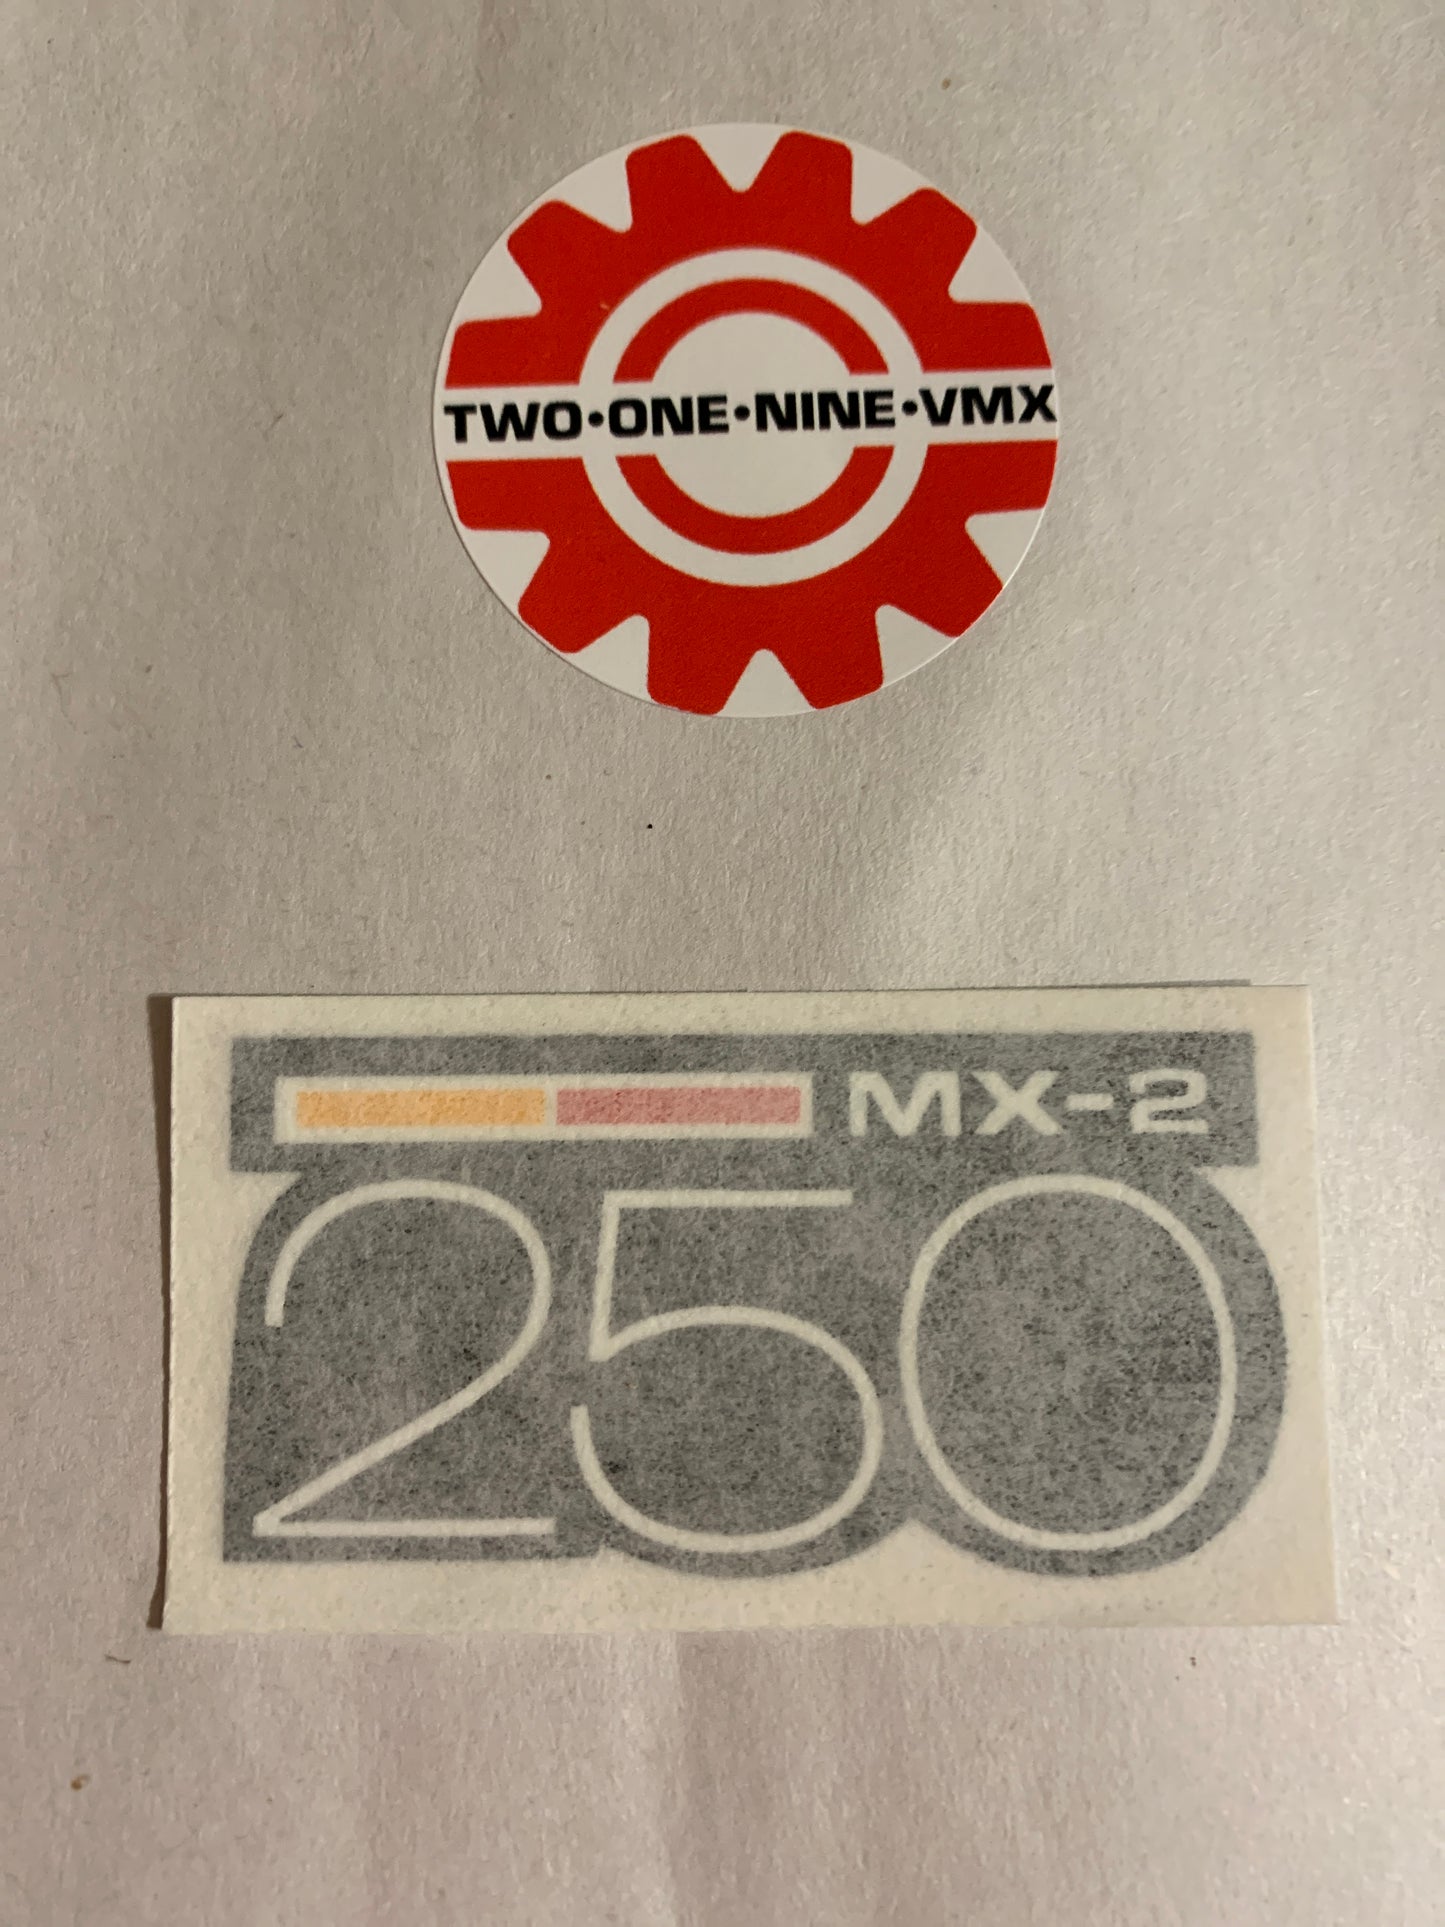 VINTAGE CAN-AM MX-2 250 SIDE COVER DECAL  BOMBARDIER ROTAX